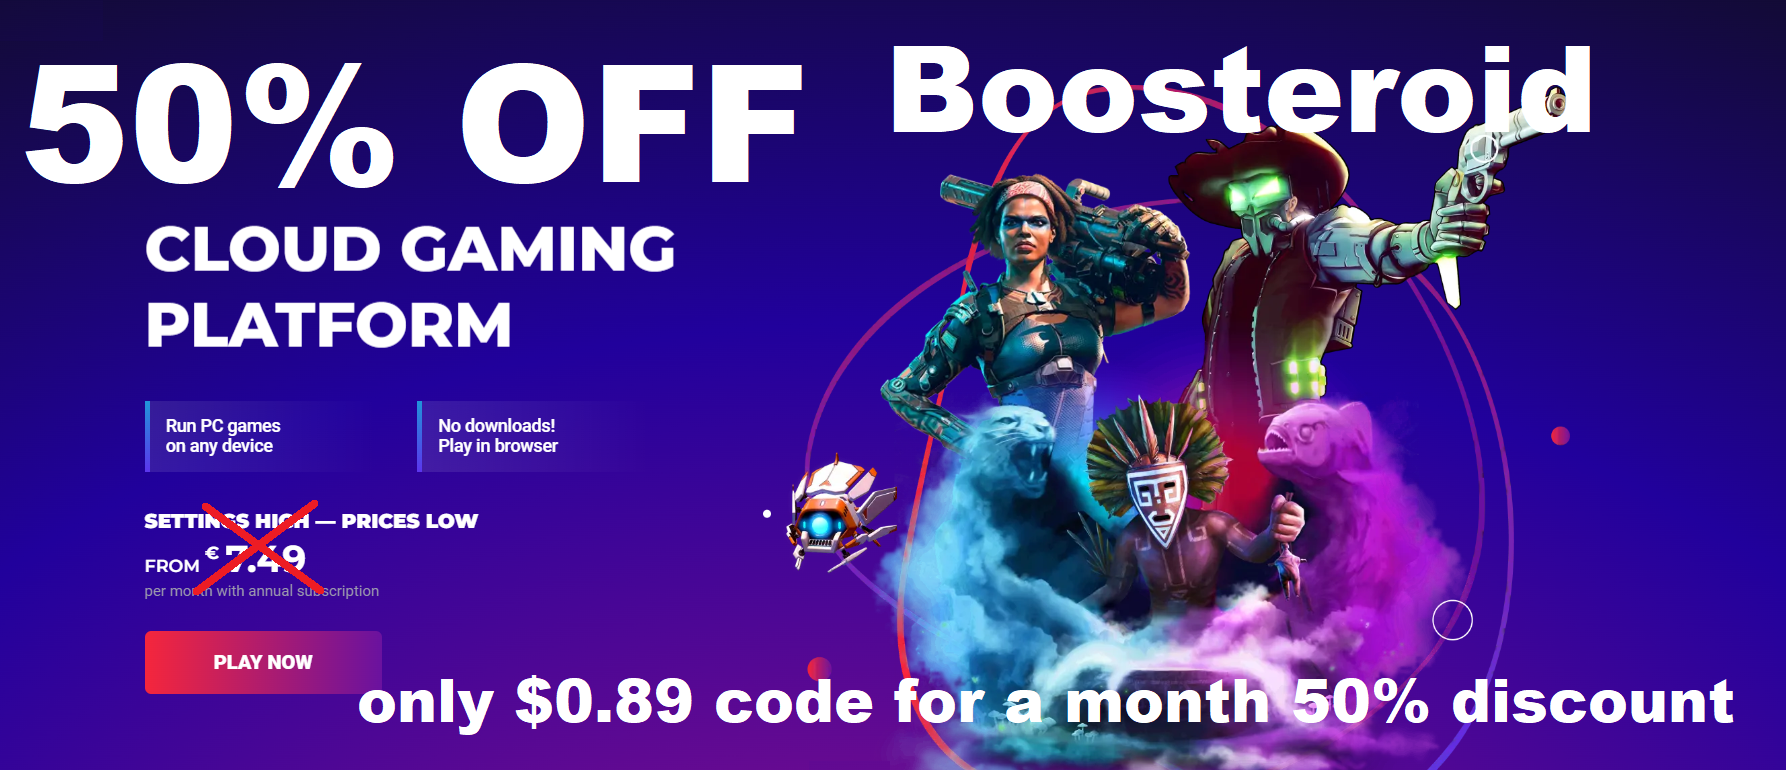 BOOSTEROID: 6 NEW GAMES, 1 of them is FREE!! +5 CODES with 30% OFF on  SUBSCRIPTION!! 